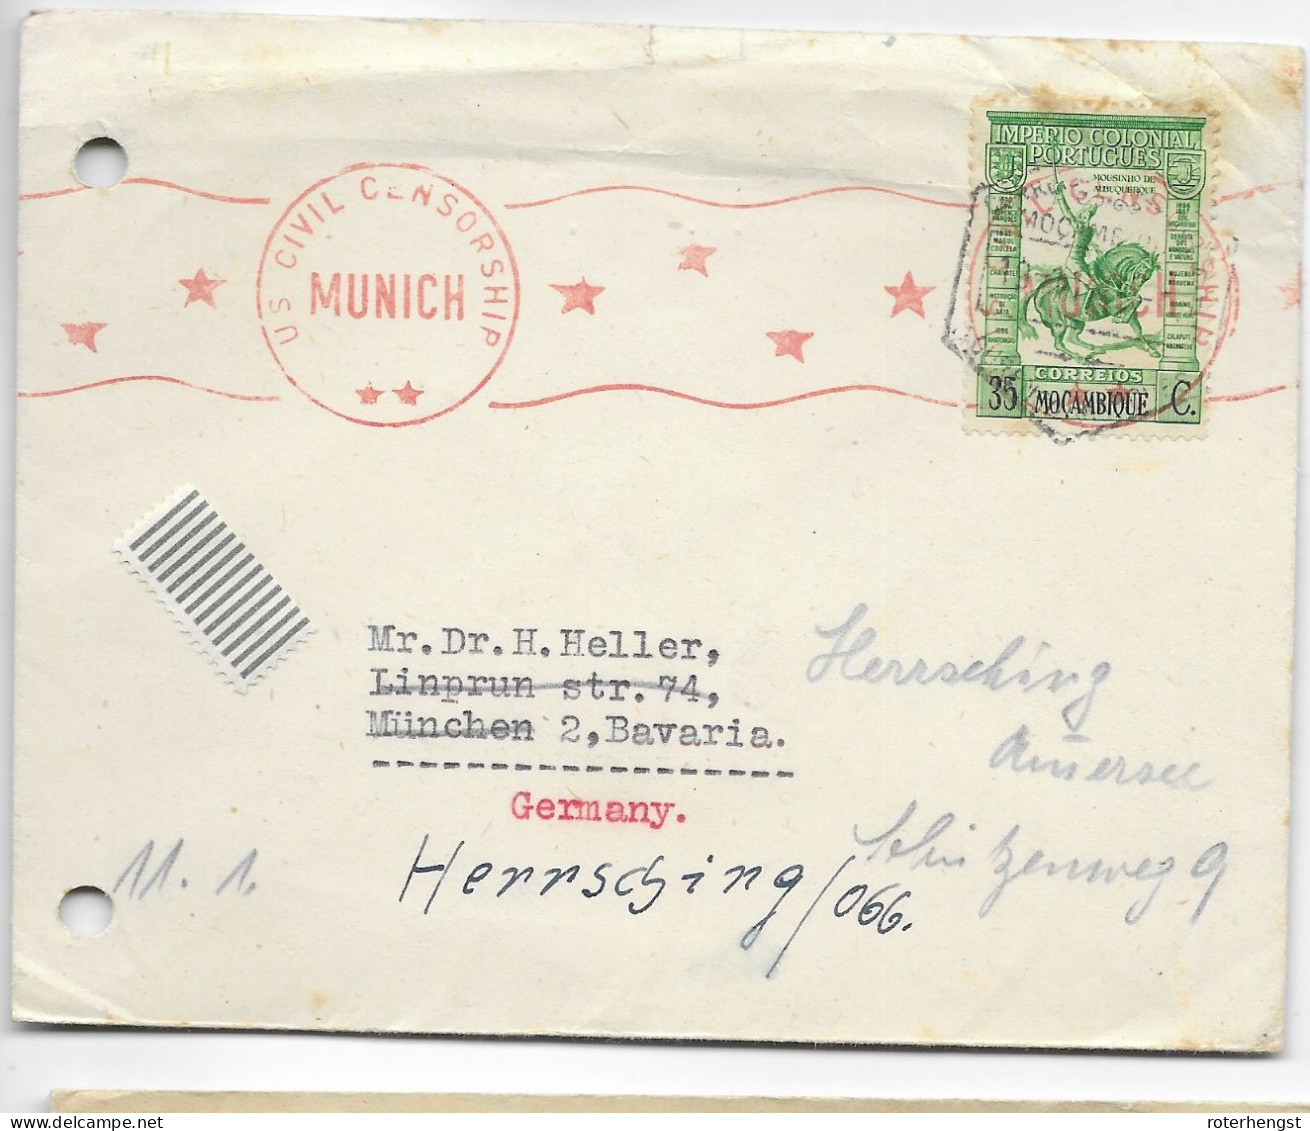 Mozambique Letter With American Censorship In Germany After WWII - Mozambique